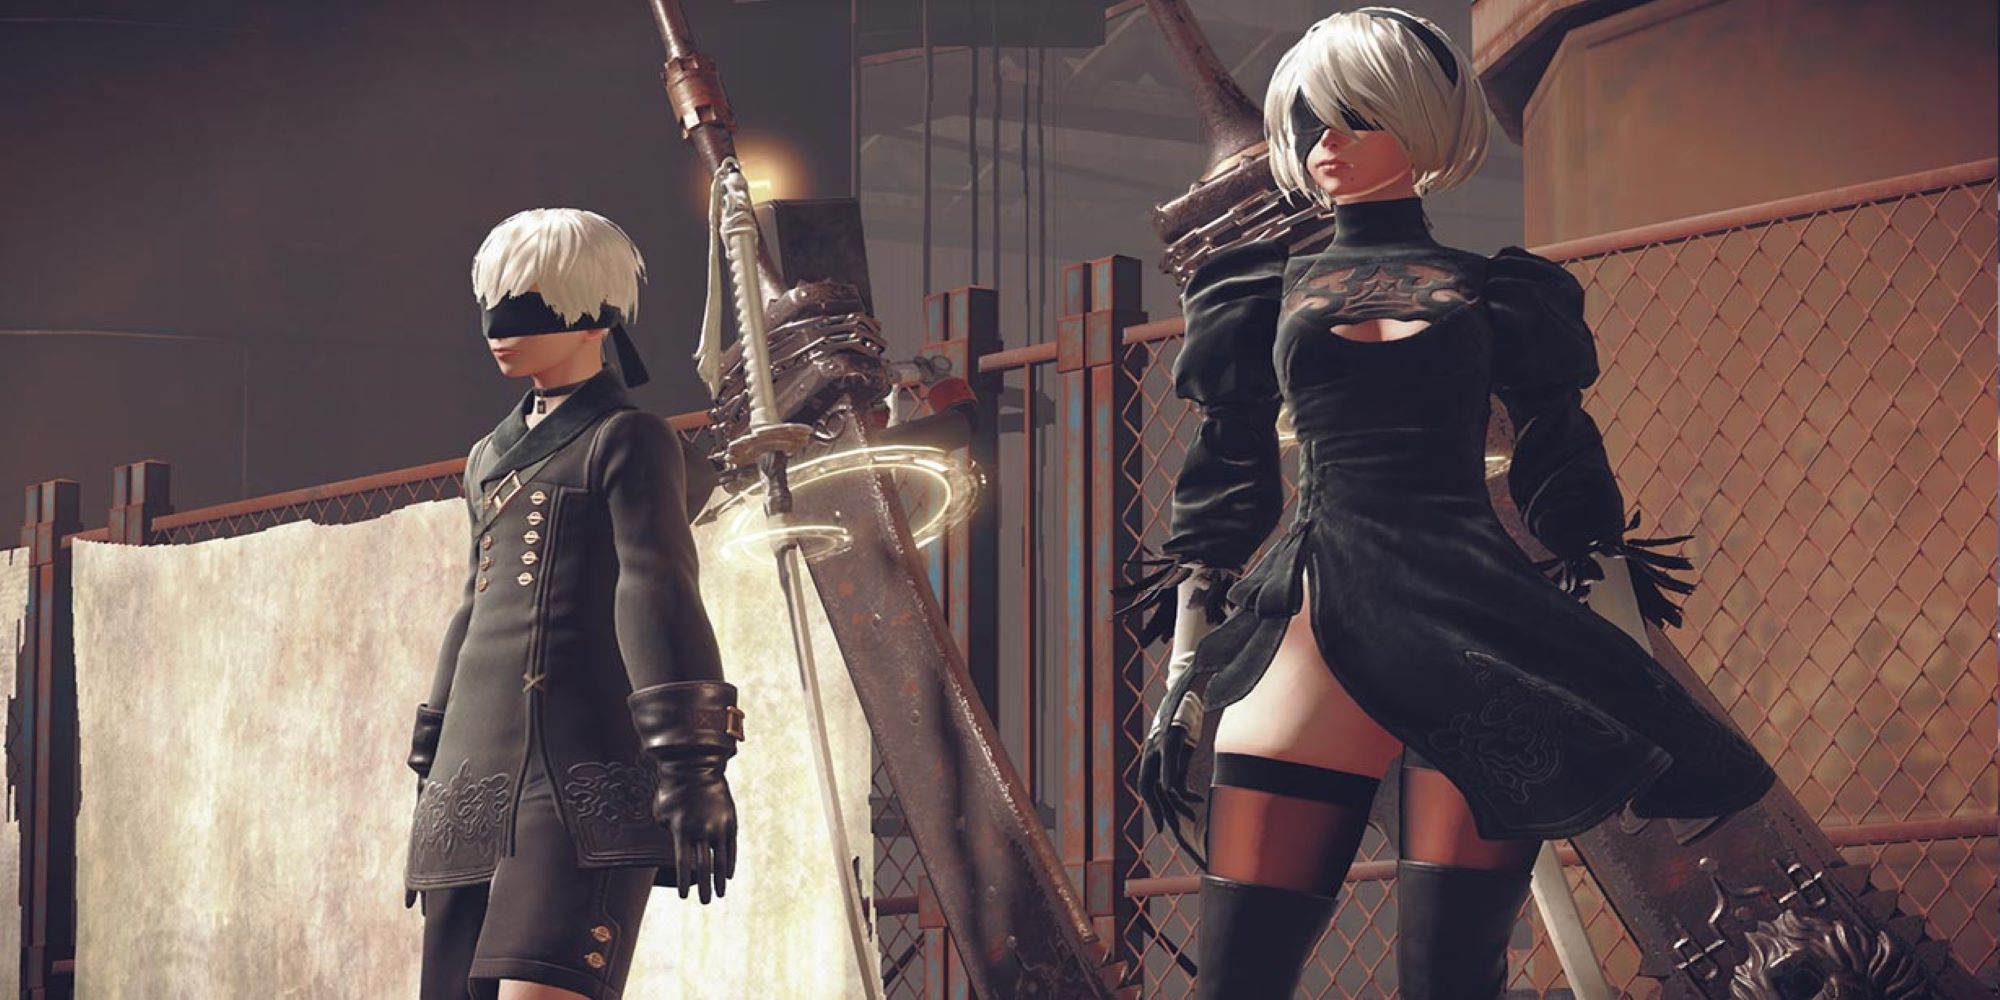 Nier Automata Screenshot of two protagonists standing side by side